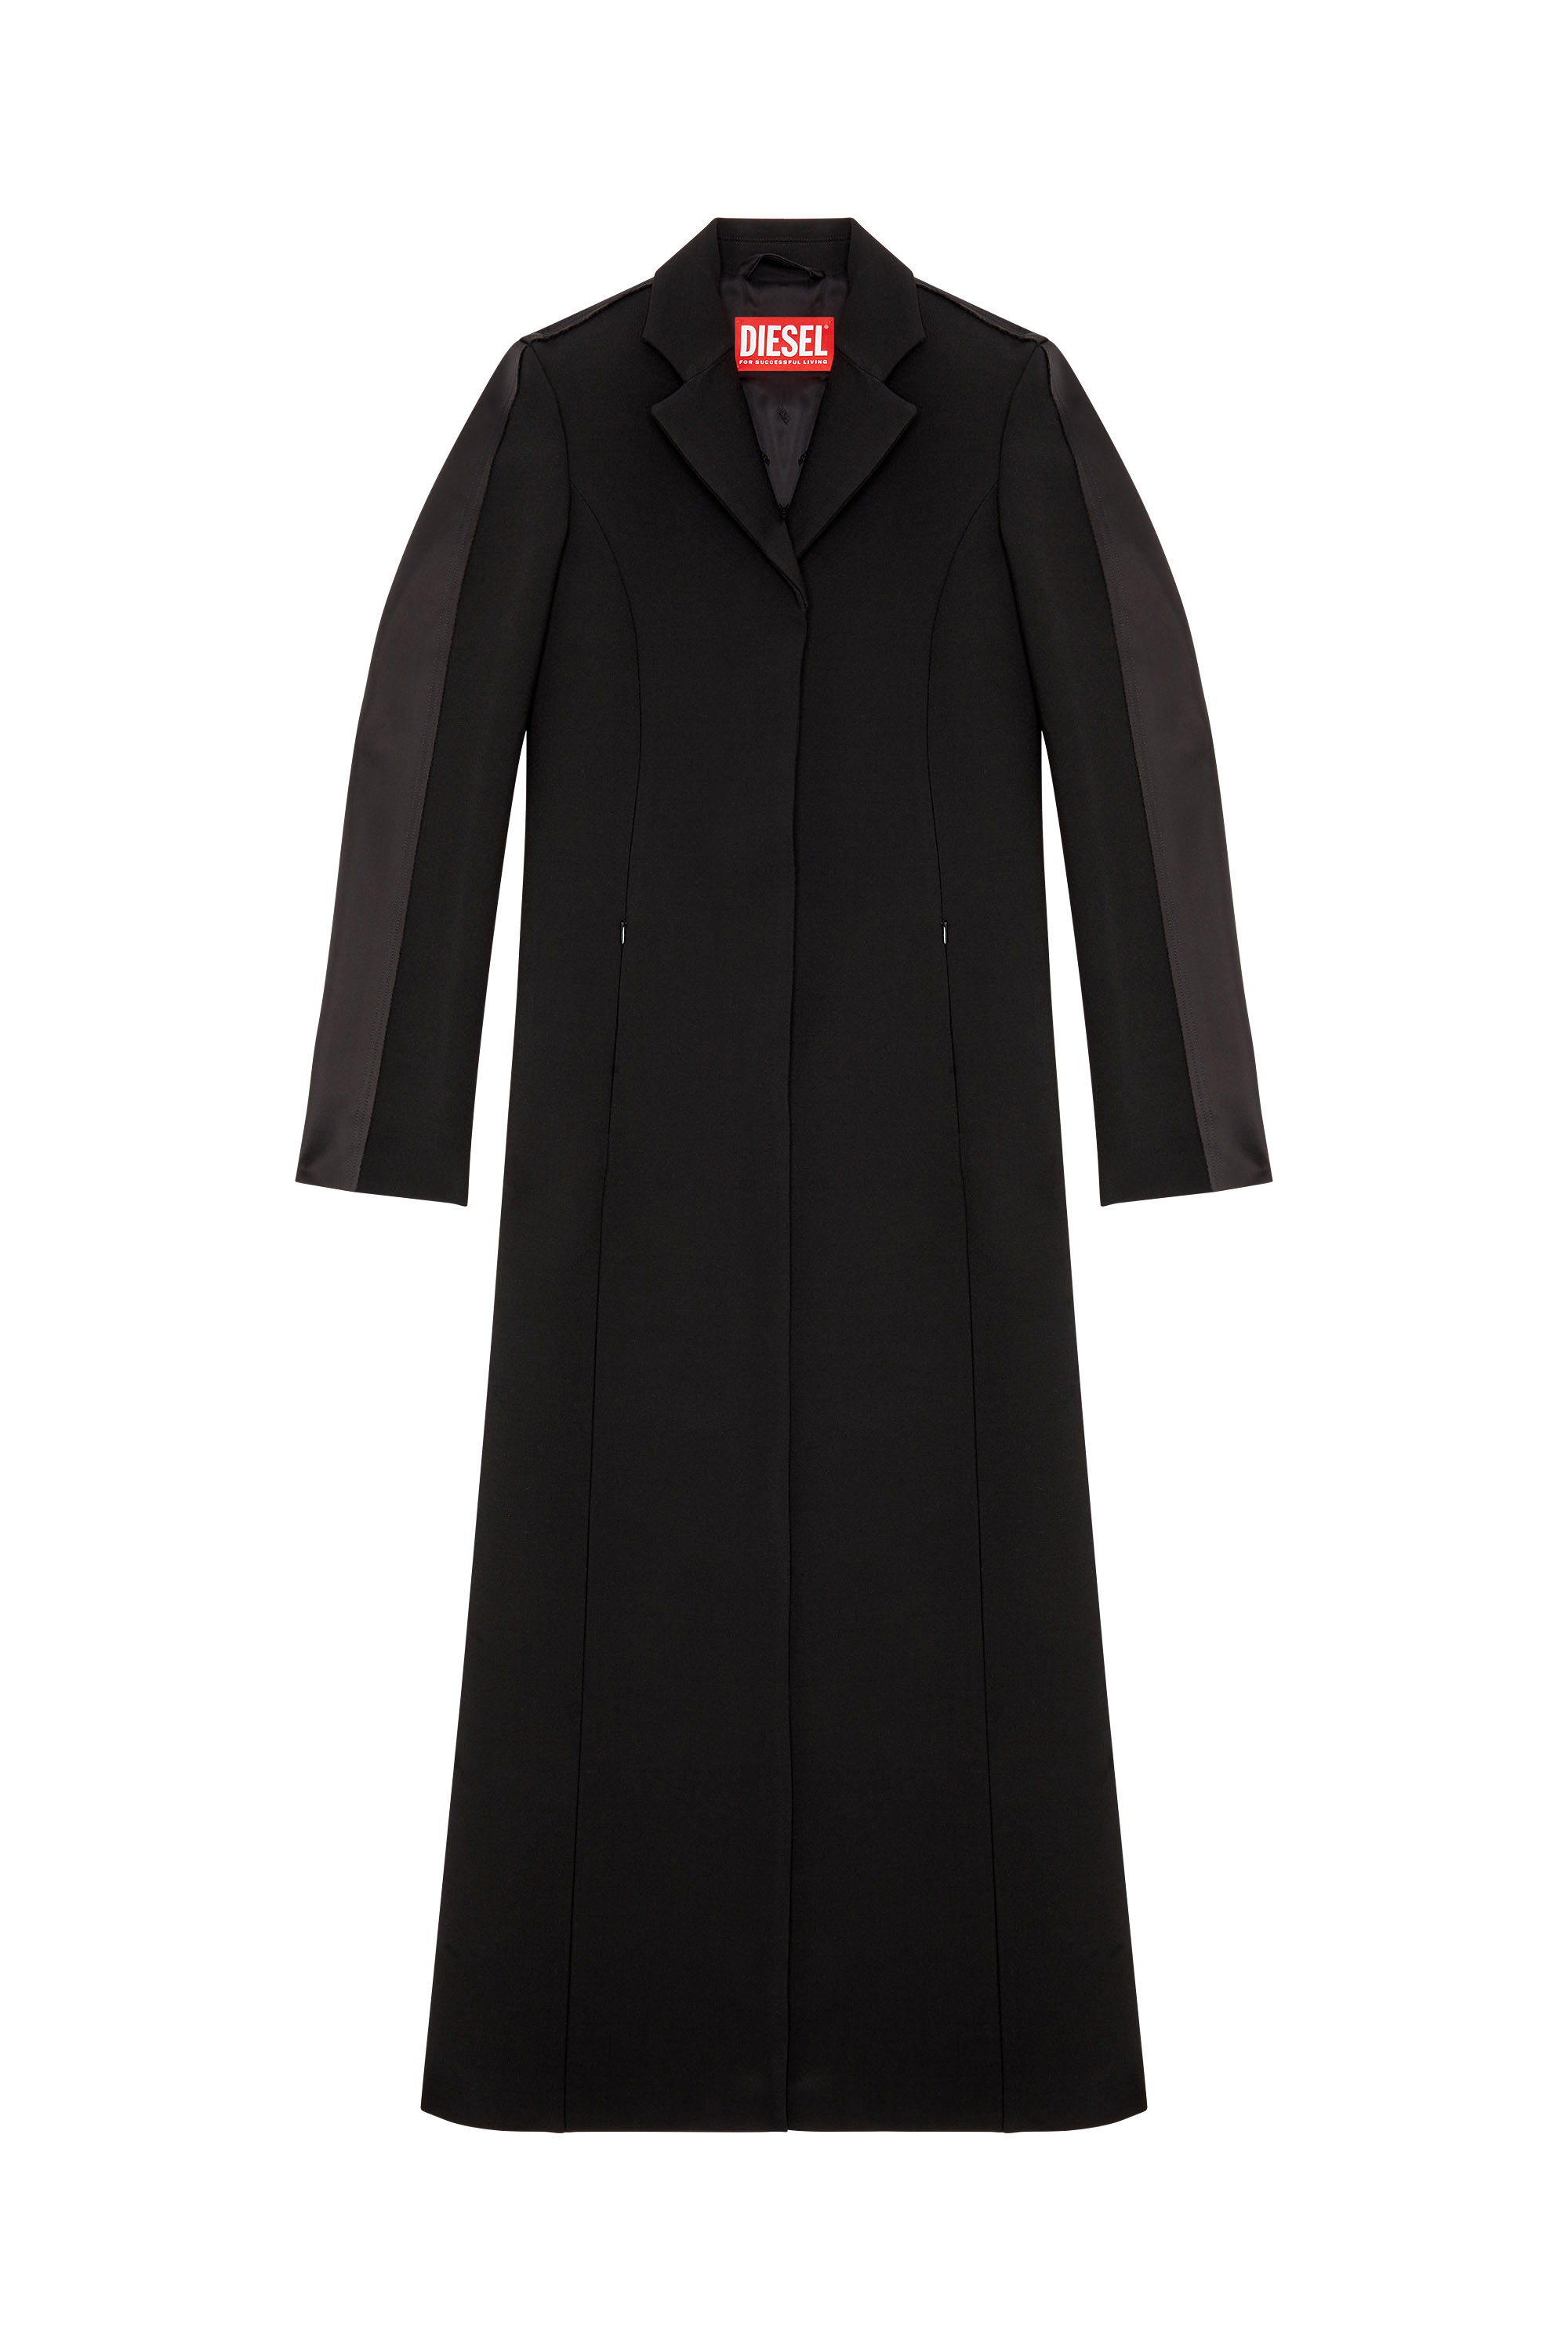 Diesel - G-FINE, Woman Long coat in cool wool and tech fabric in Black - Image 2